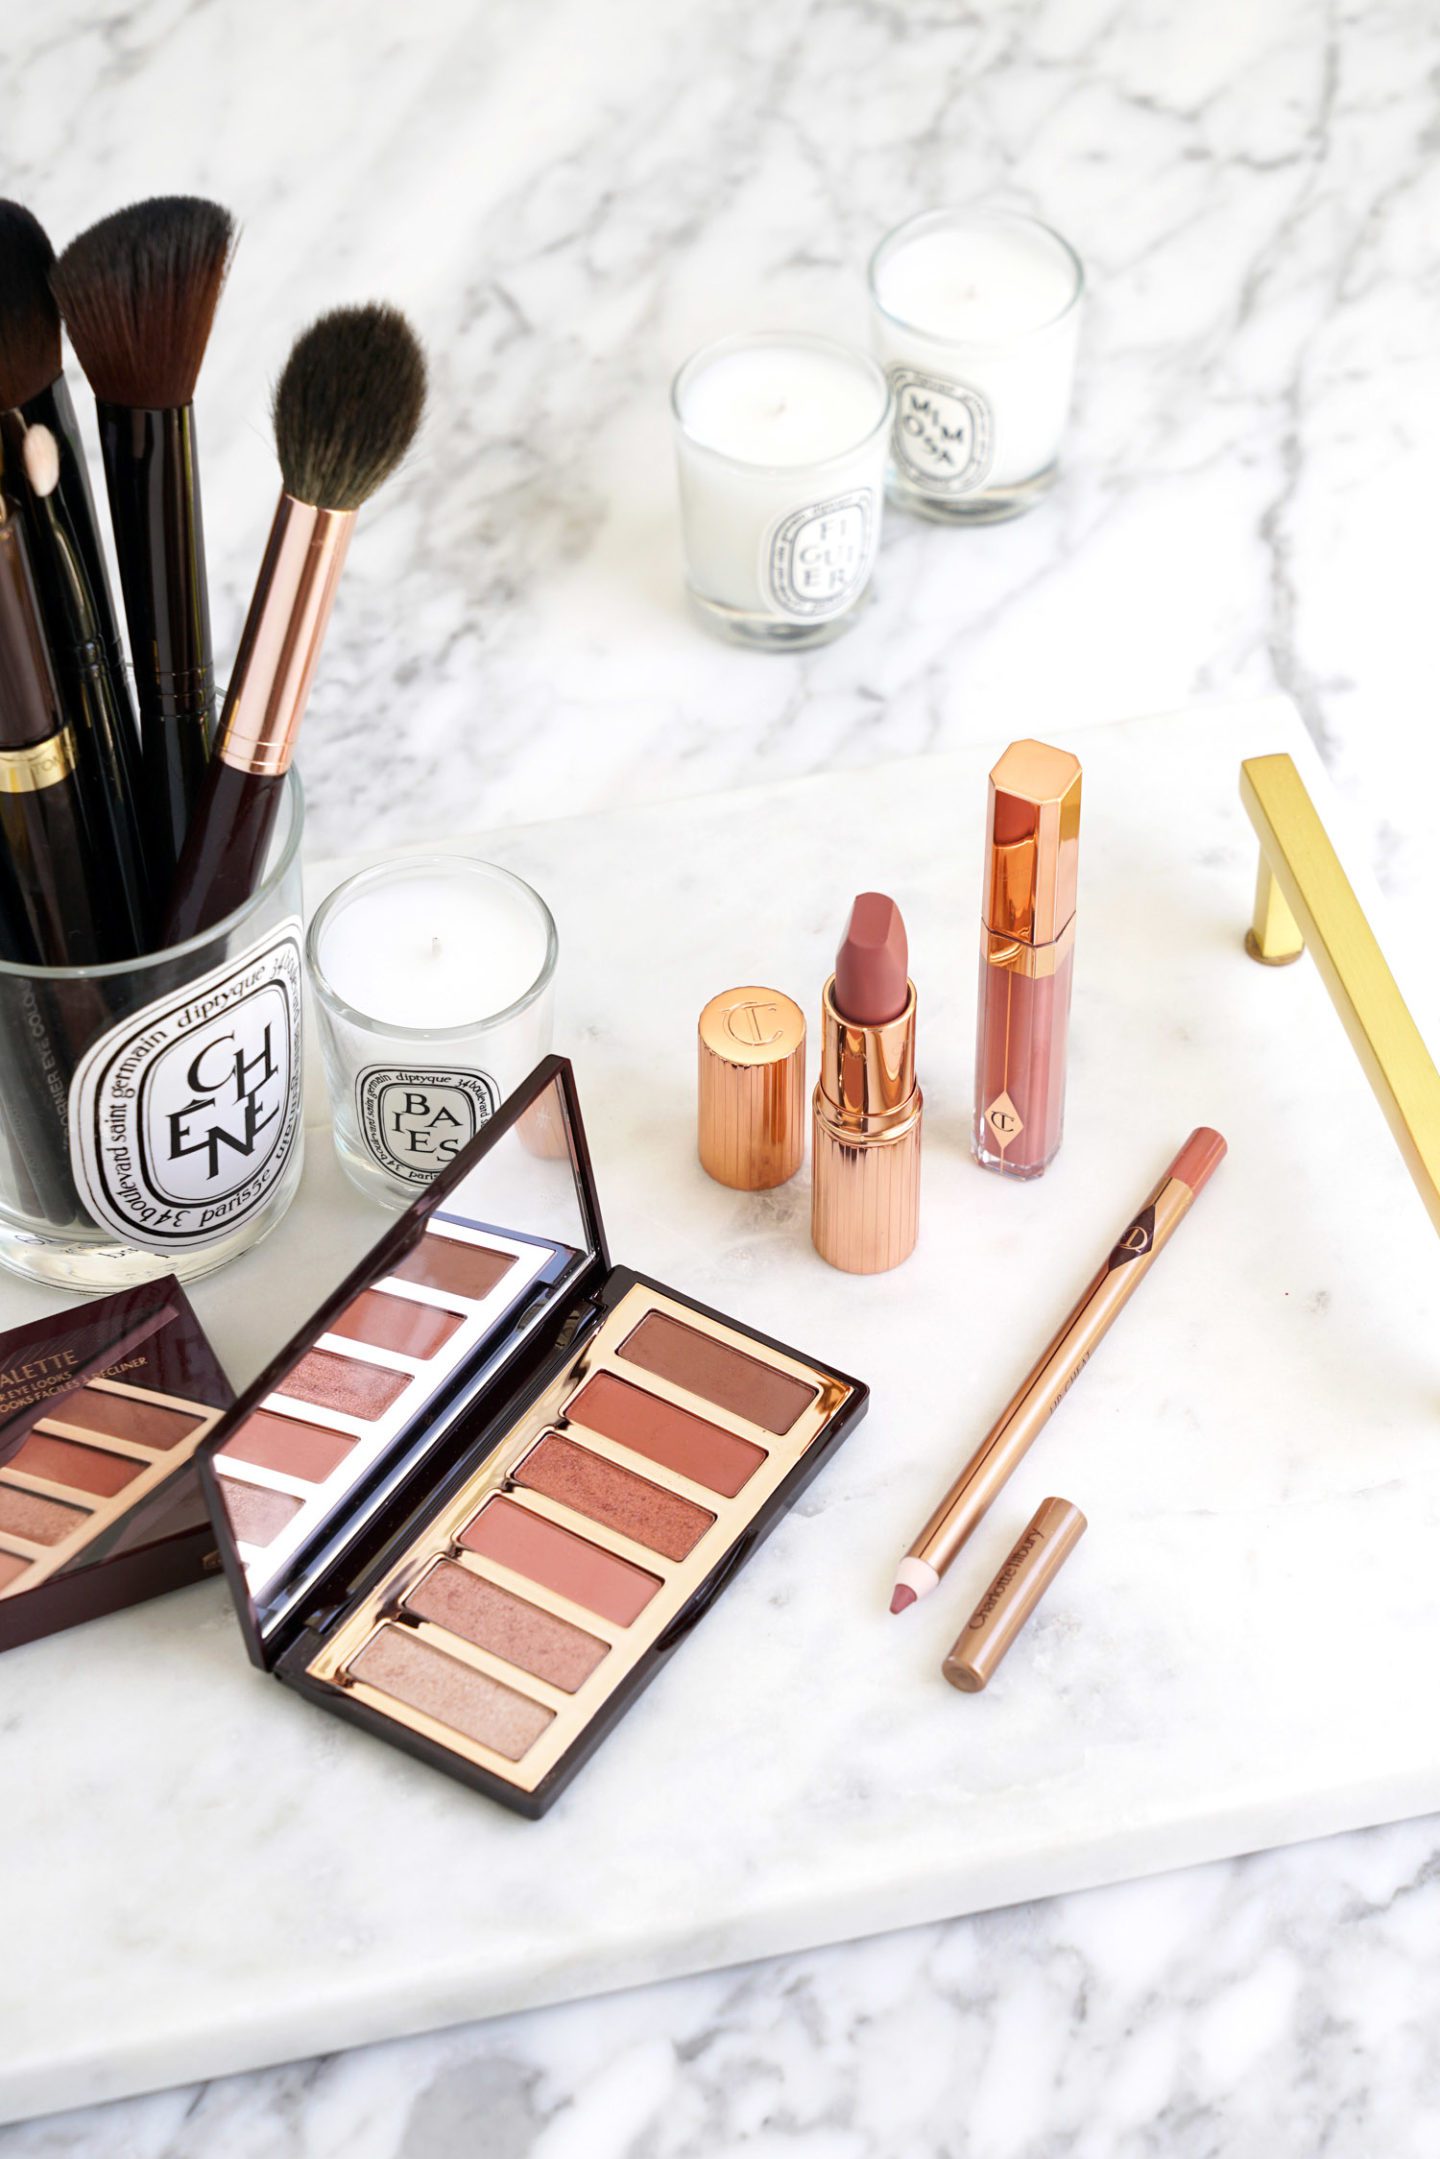 Charlotte Tilbury Nordstrom Beauty Exclusives